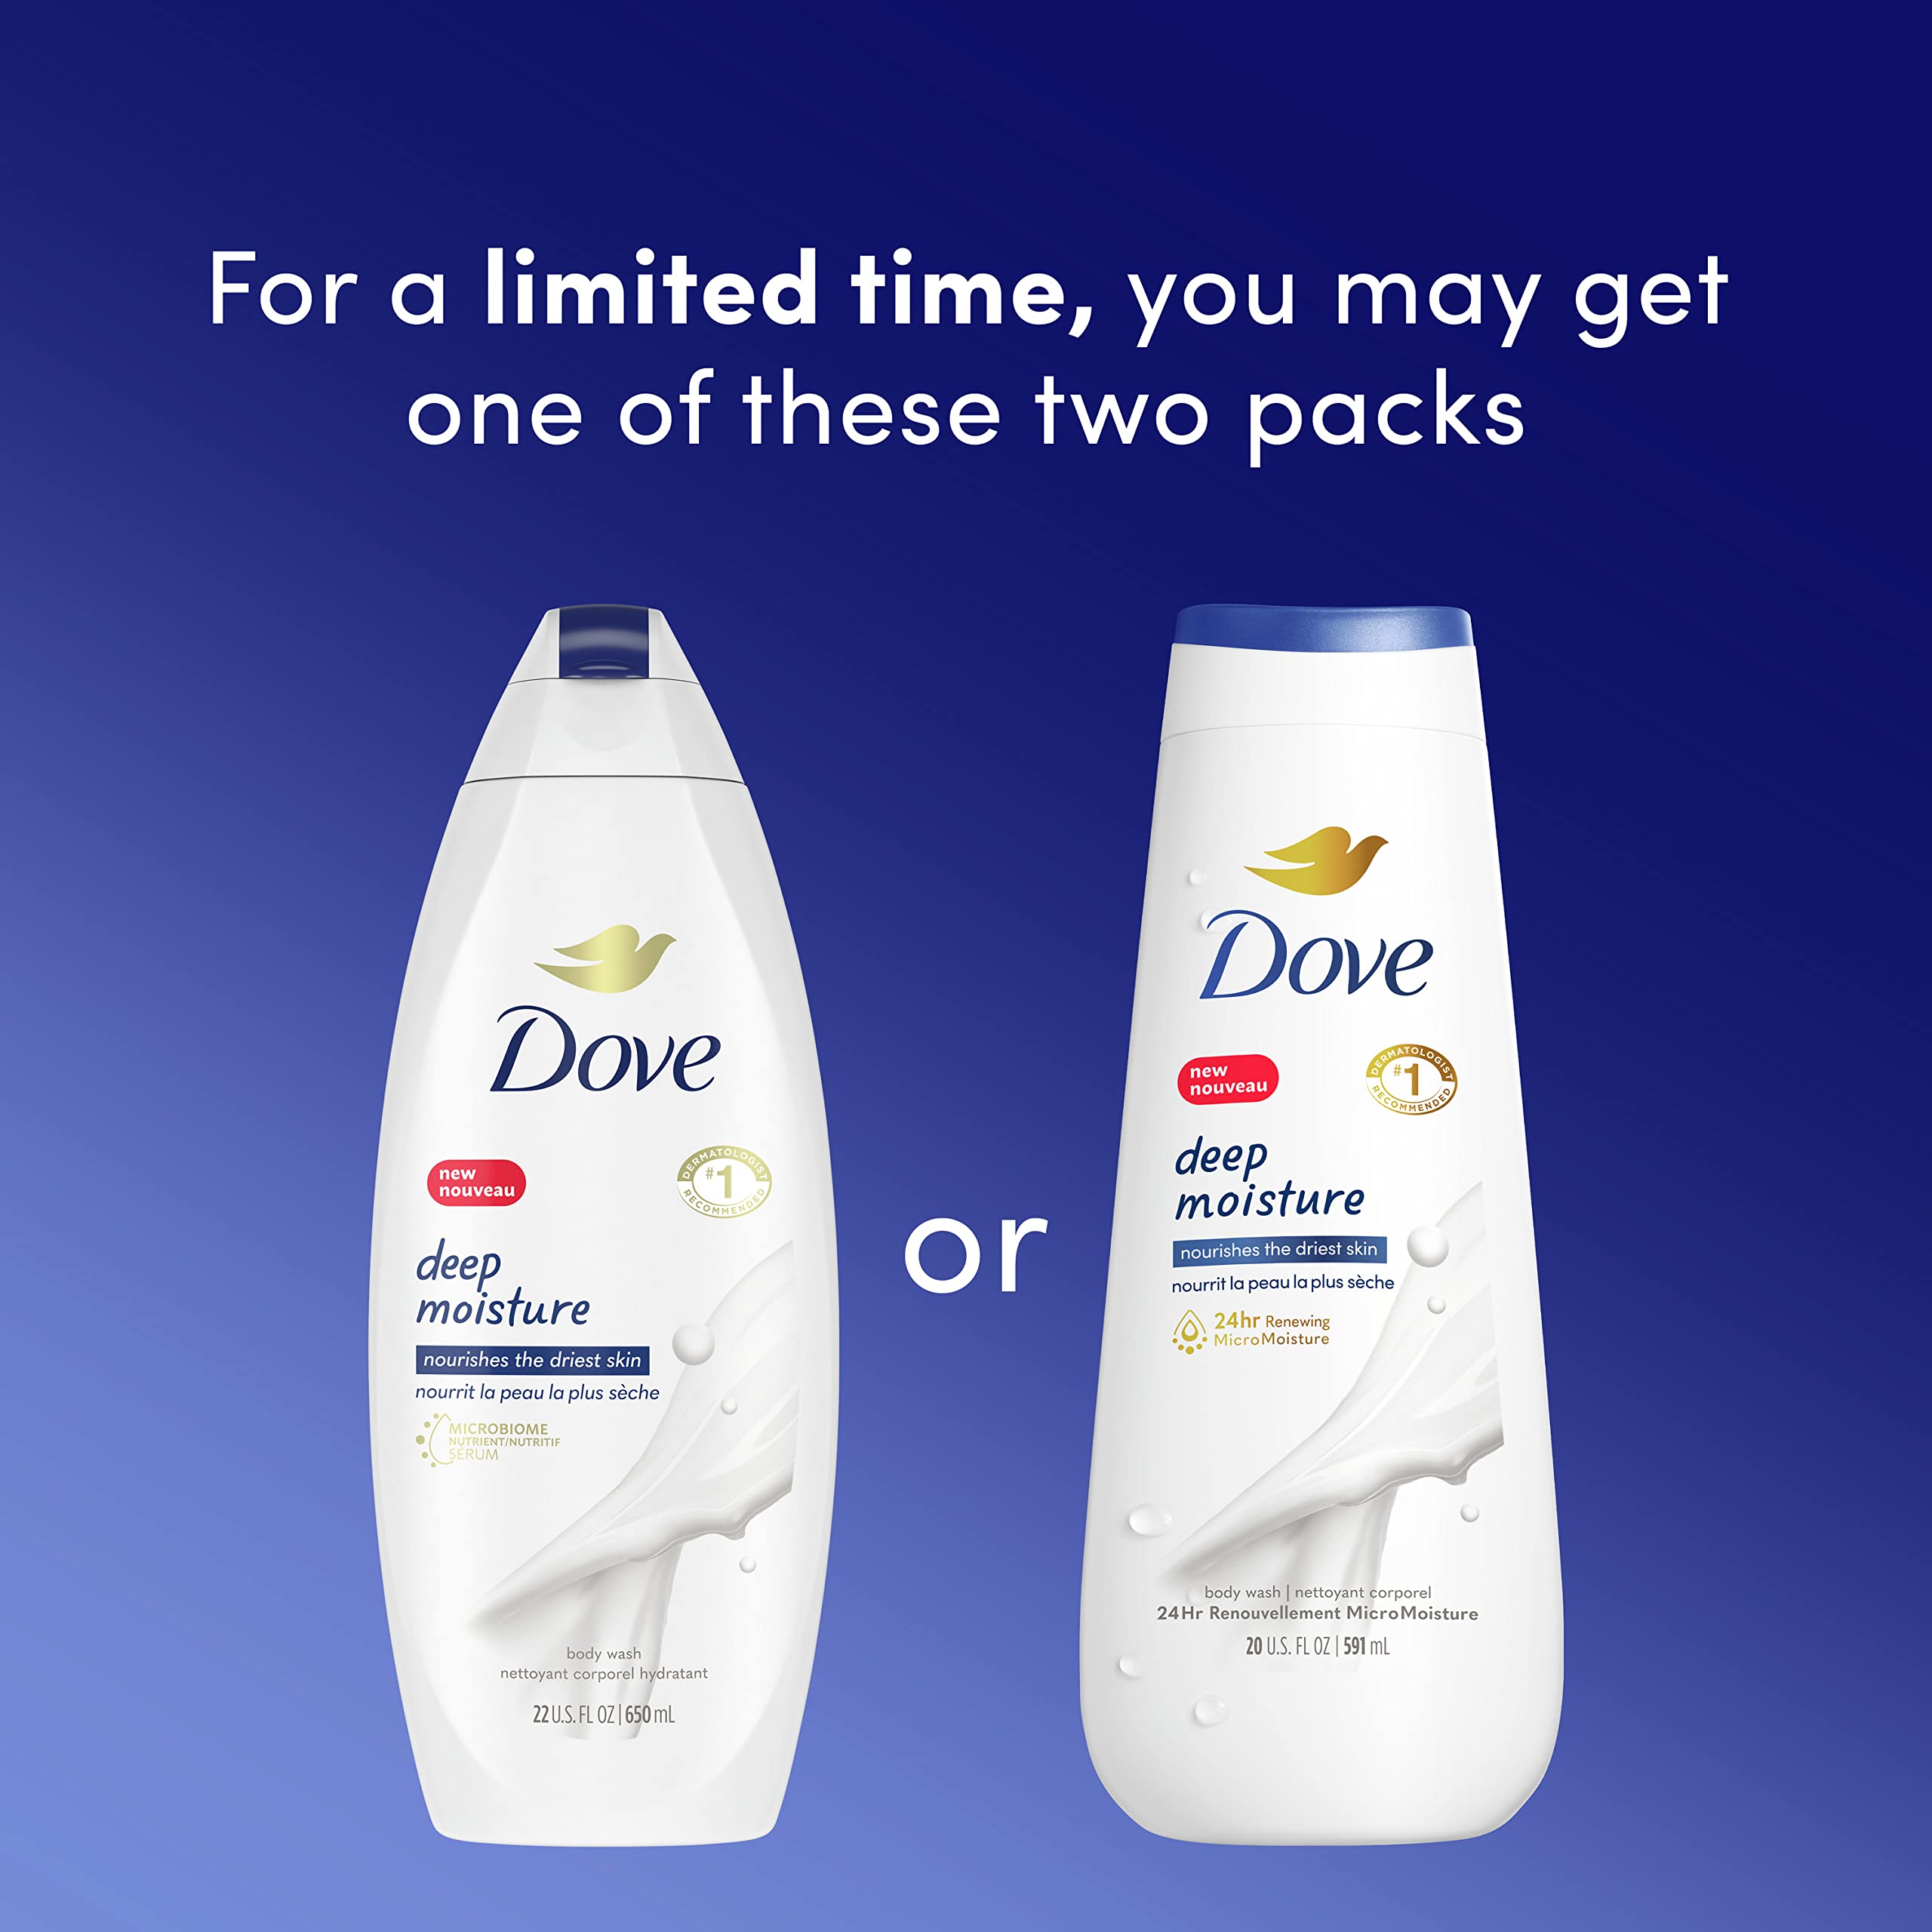 Dove Body Wash For Dry Skin Deep Moisture Moisturizing Skin Cleanser with 24hr Renewing MicroMoisture Nourishes The Driest Skin 20 oz